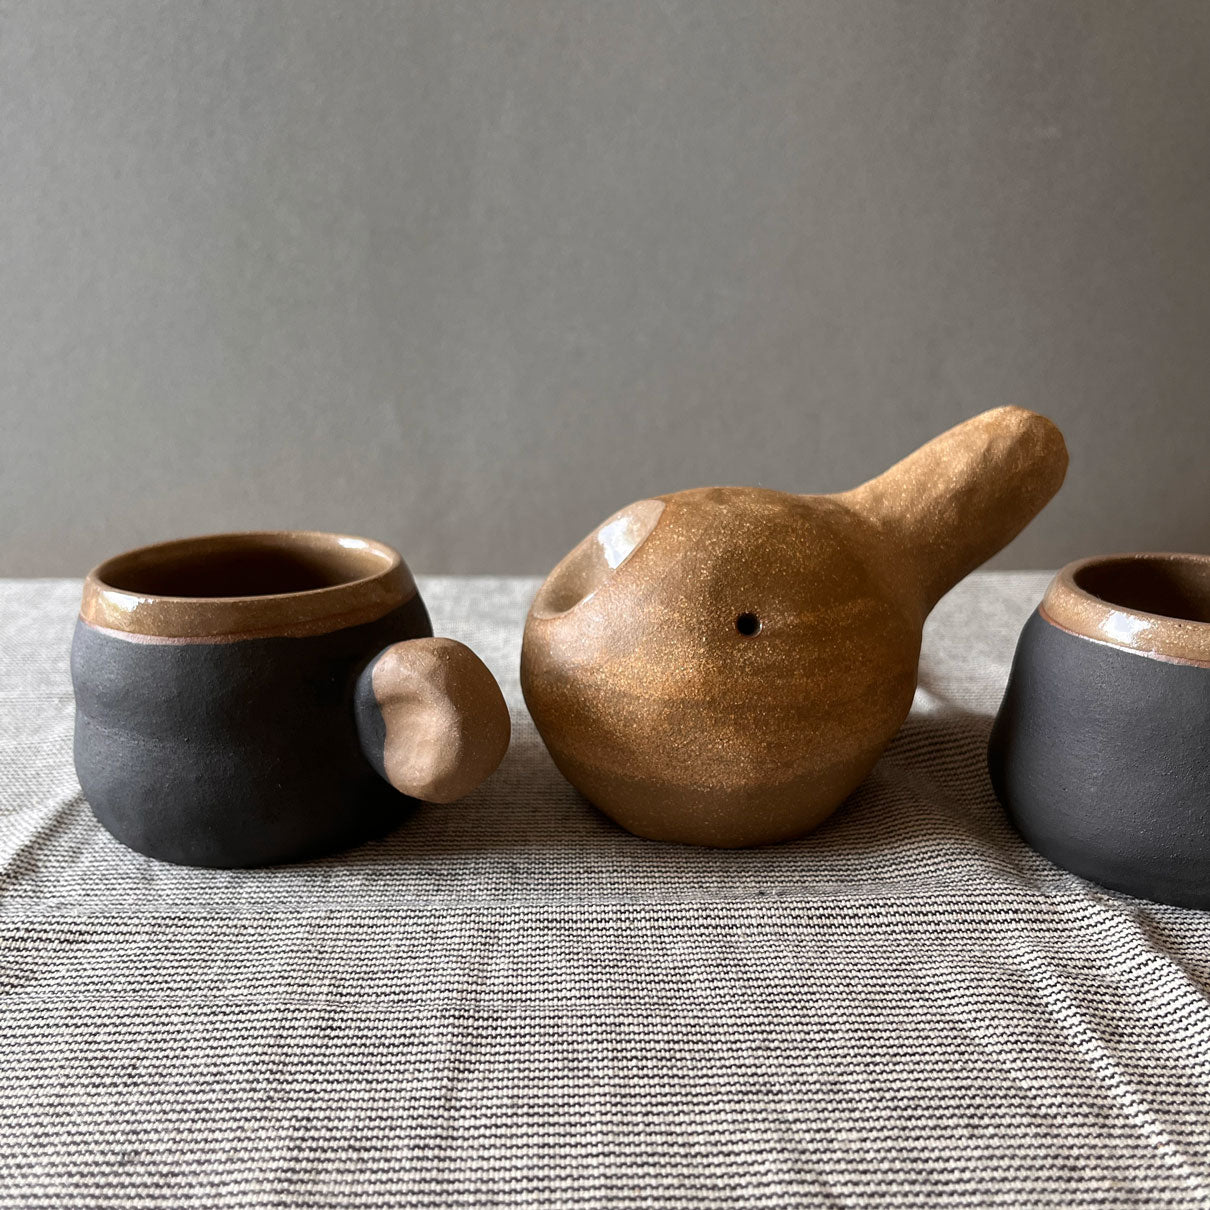 An elegant billowing body form in brown stoneware, featuring a hammered raw texture. Black underglazed exterior that has a volcanic rock texture, with a clear glazed lip and interior. 